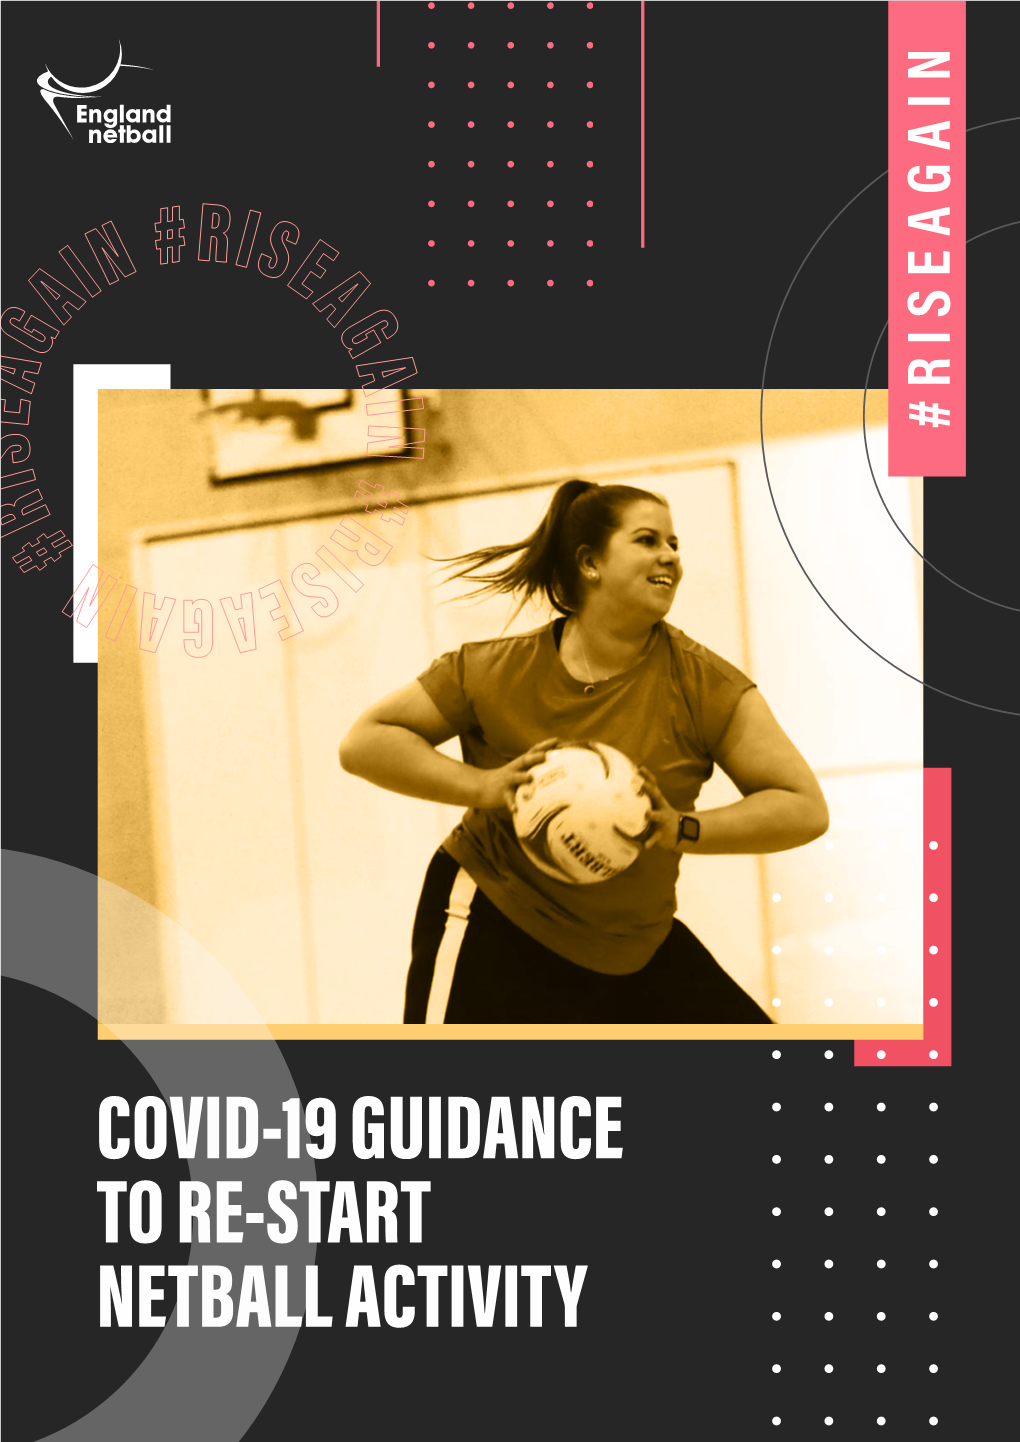 Covid-19 Guidance to Re-Start Netball Activity